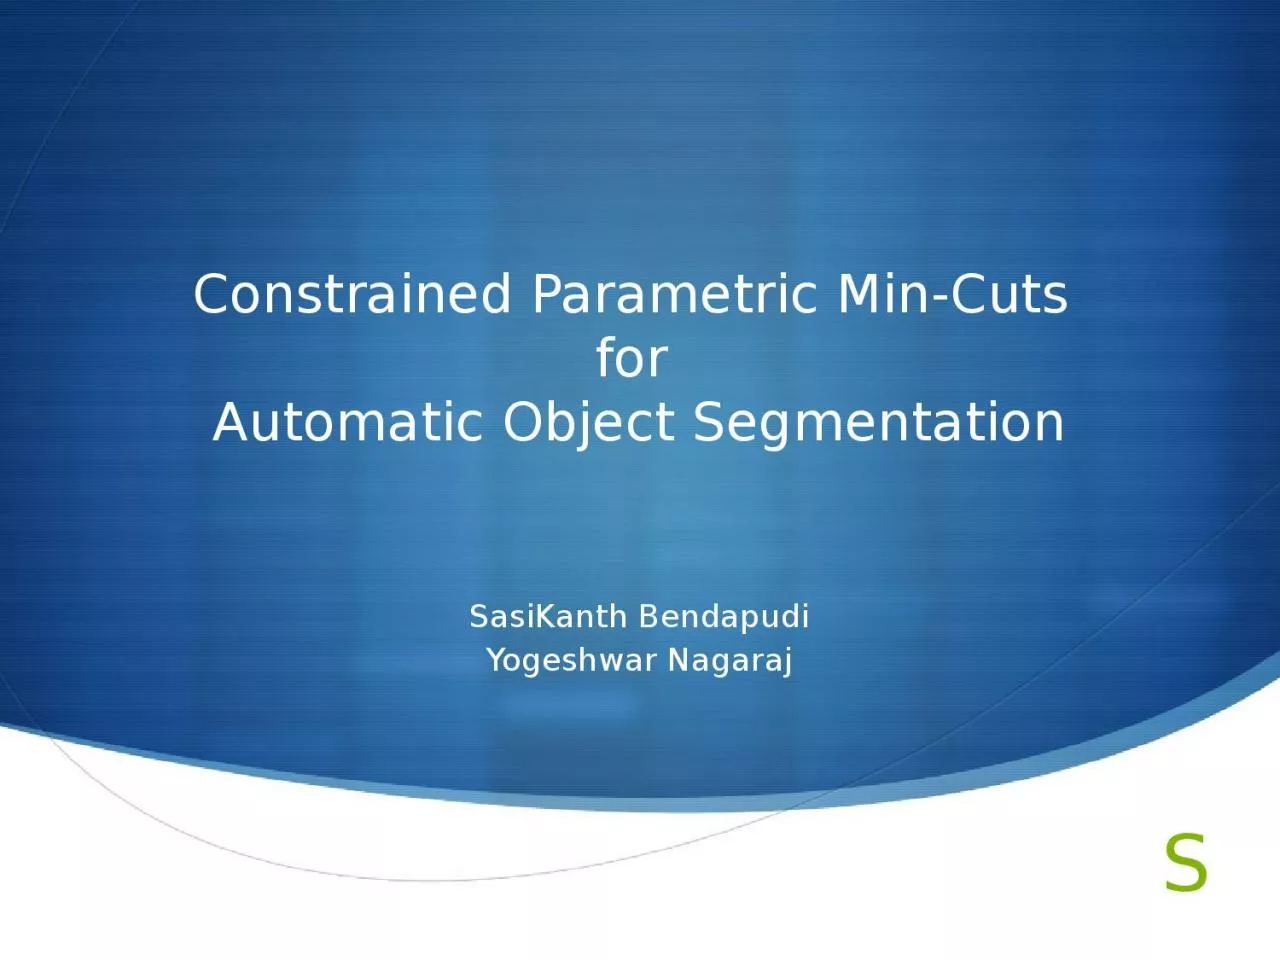 Constrained Parametric Min-Cuts